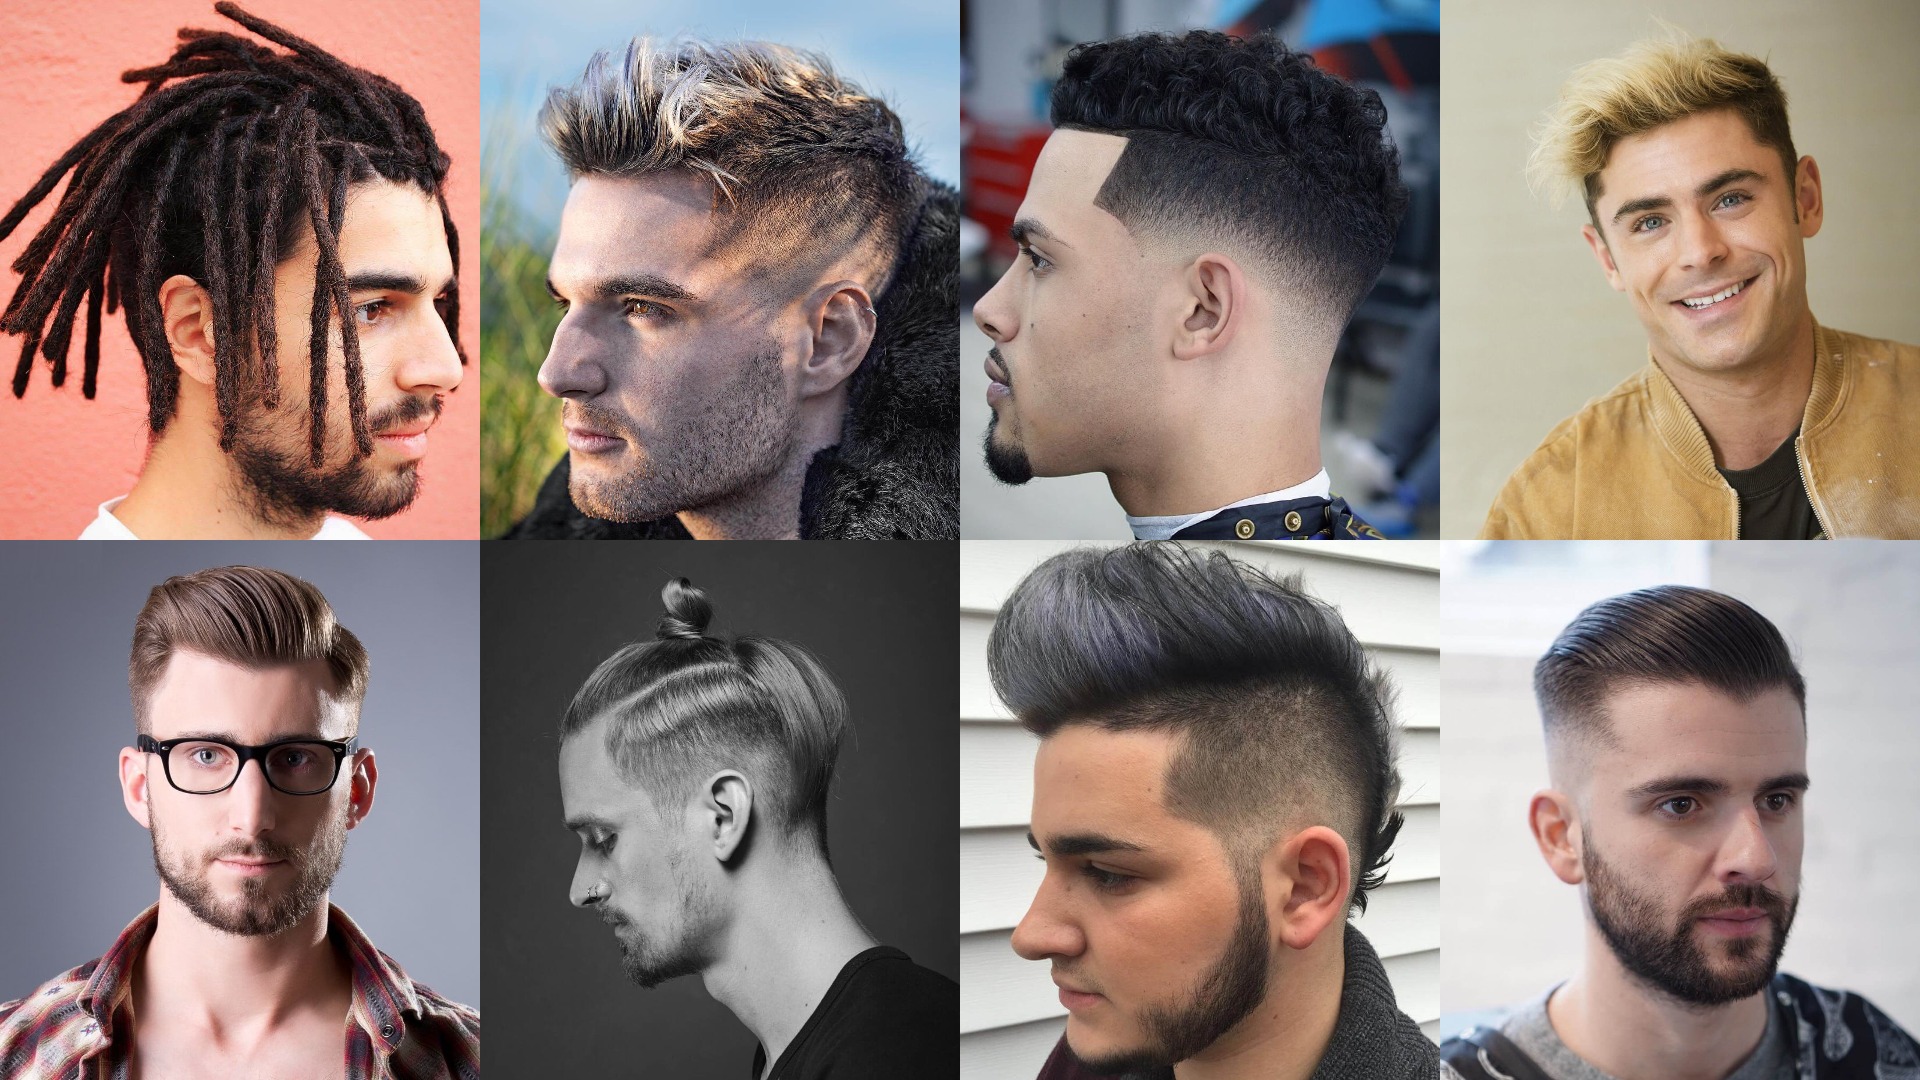 Top 30 Professional  Business Hairstyles for Men  Professional hairstyles  for men Business hairstyles Cool hairstyles